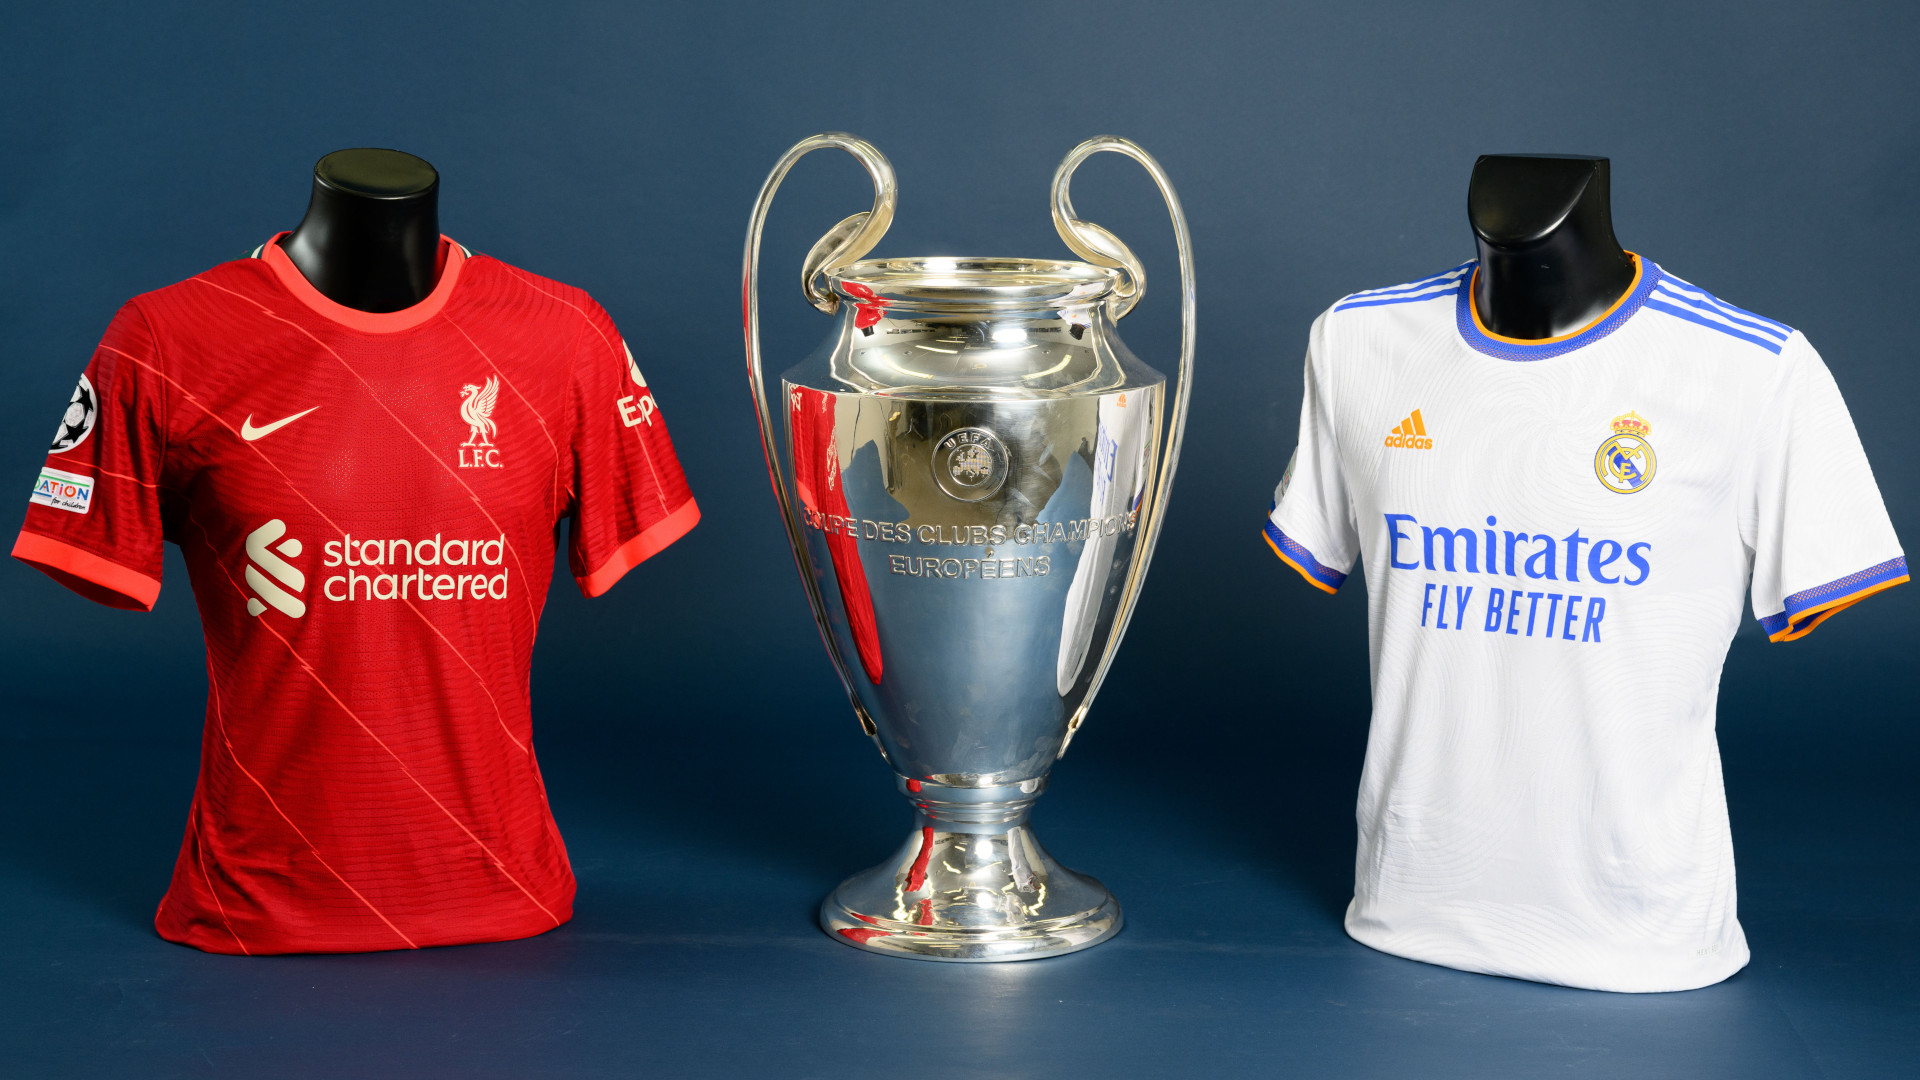 Liverpool vs Real Madrid shirts either side of the Champions League trophy